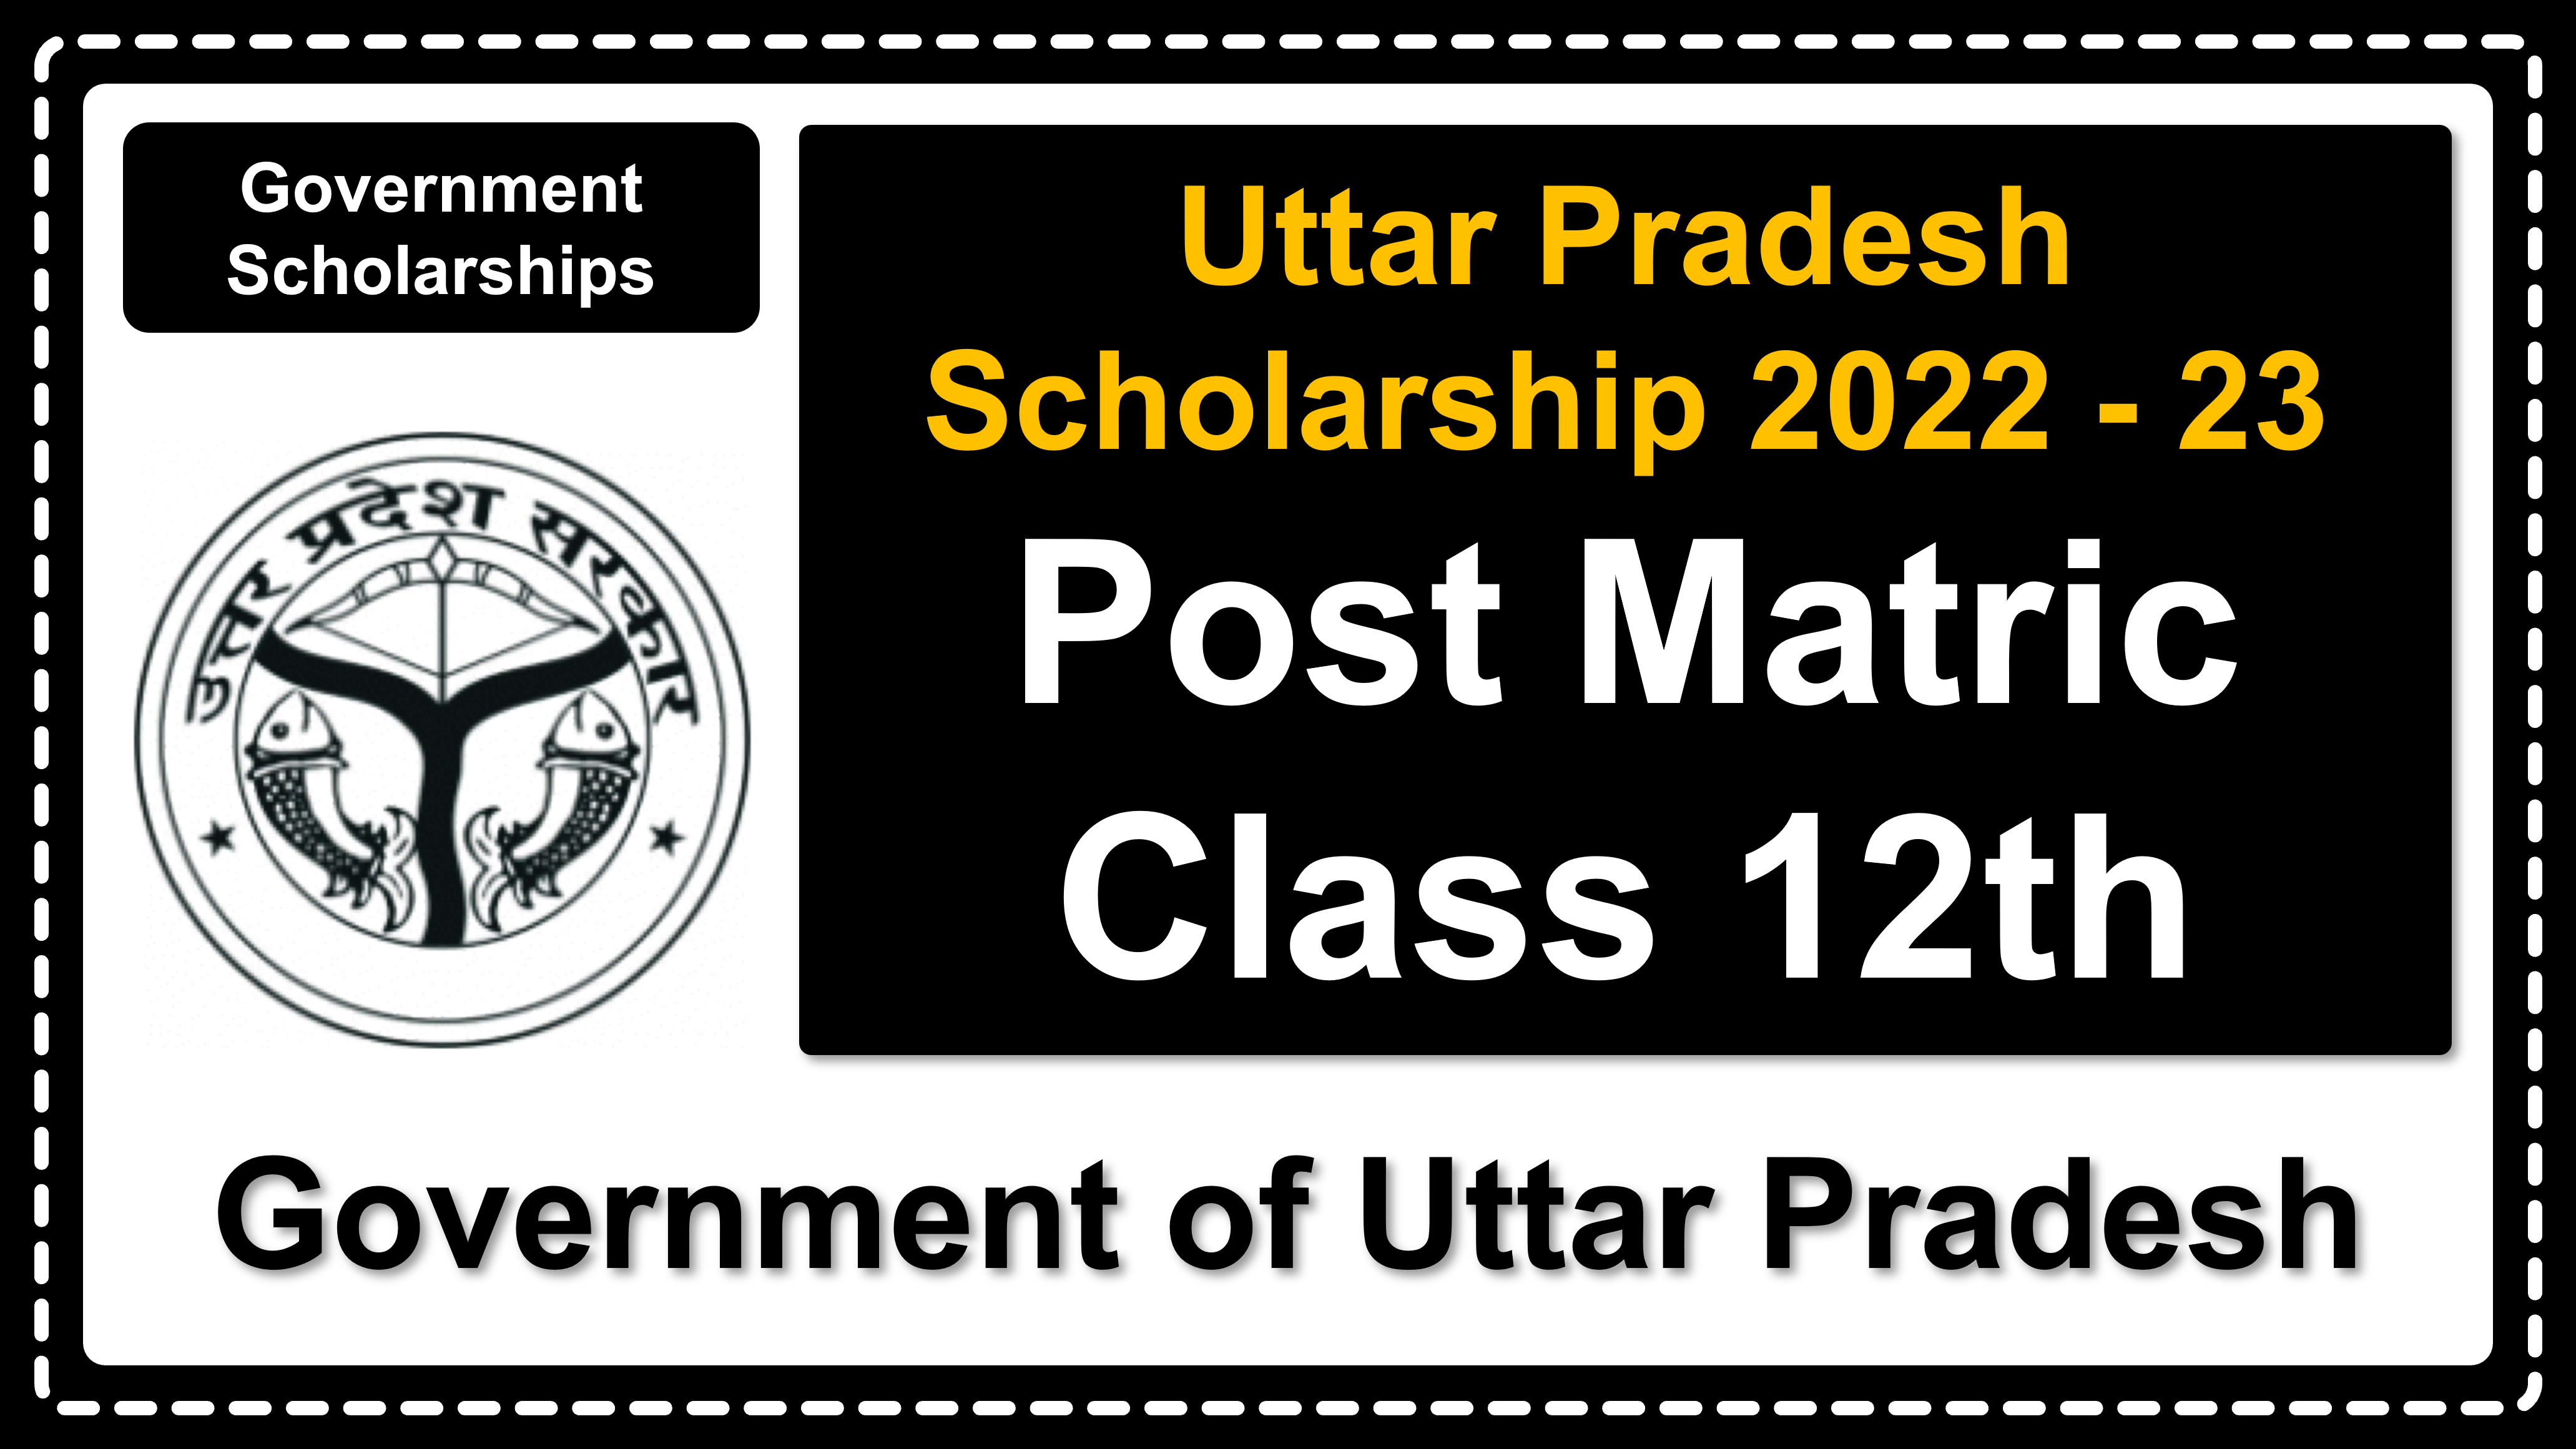 scholarship.up.gov.in | Government of Uttar Pradesh | Details of Scholarship Rules, Important Dates, Eligibility Criteria, Fee, Document, How to Apply etc. | Government of Uttar Pradesh